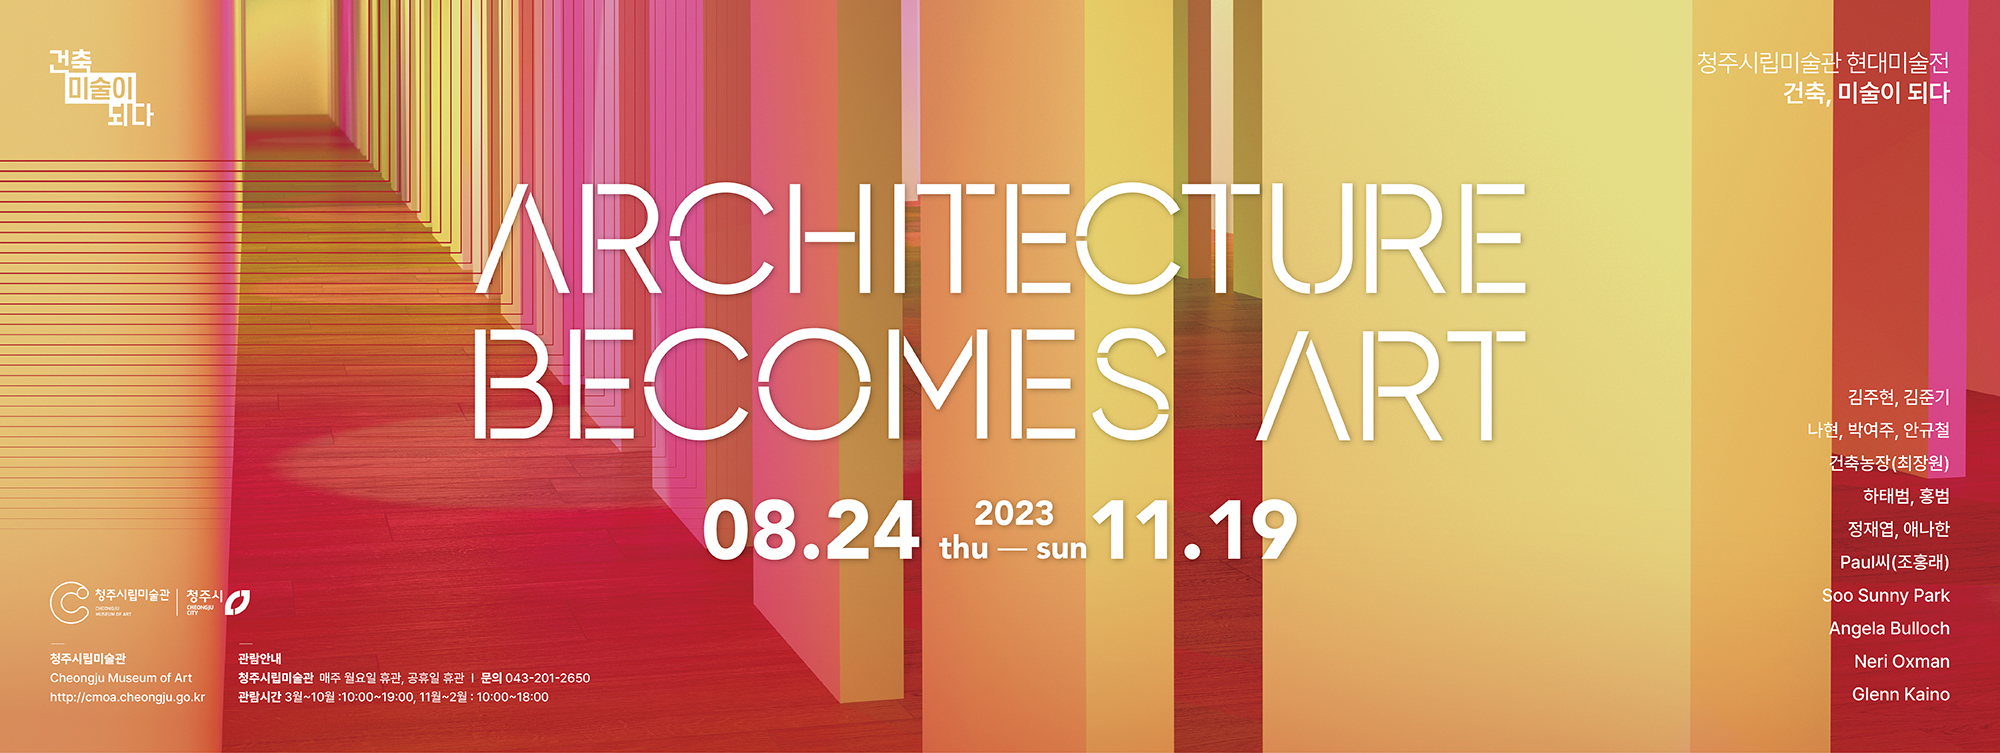 2023 CMOA, Architecture Becomes Art